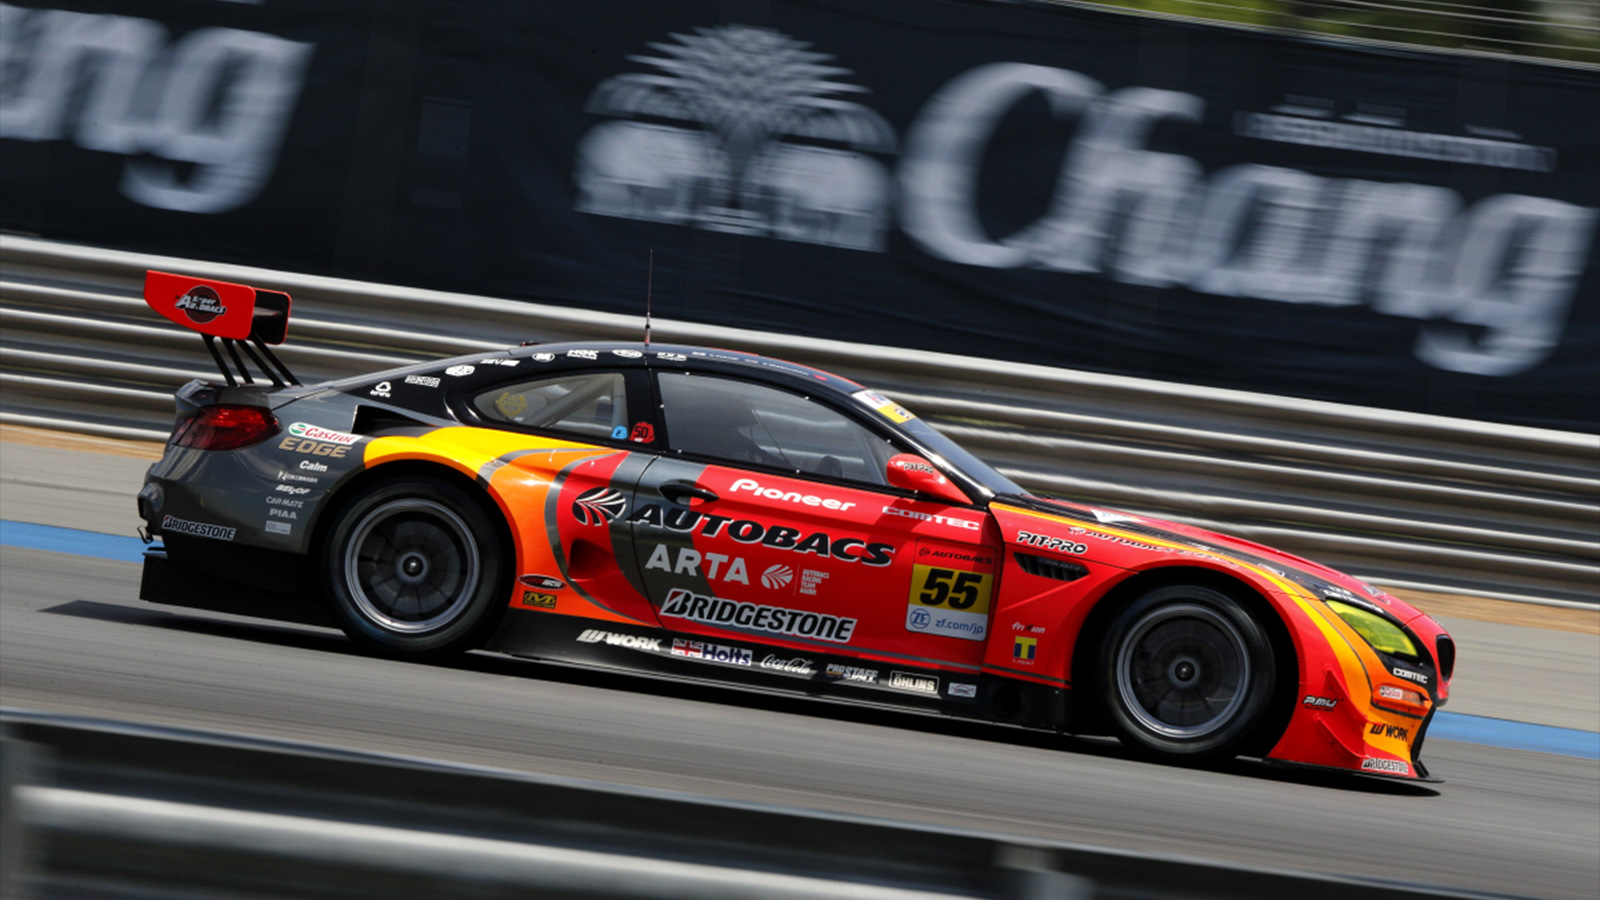 Penultimate Race of Super GT Season at Autopolis Next for GT300 Points Leaders Walkinshaw and Takagi